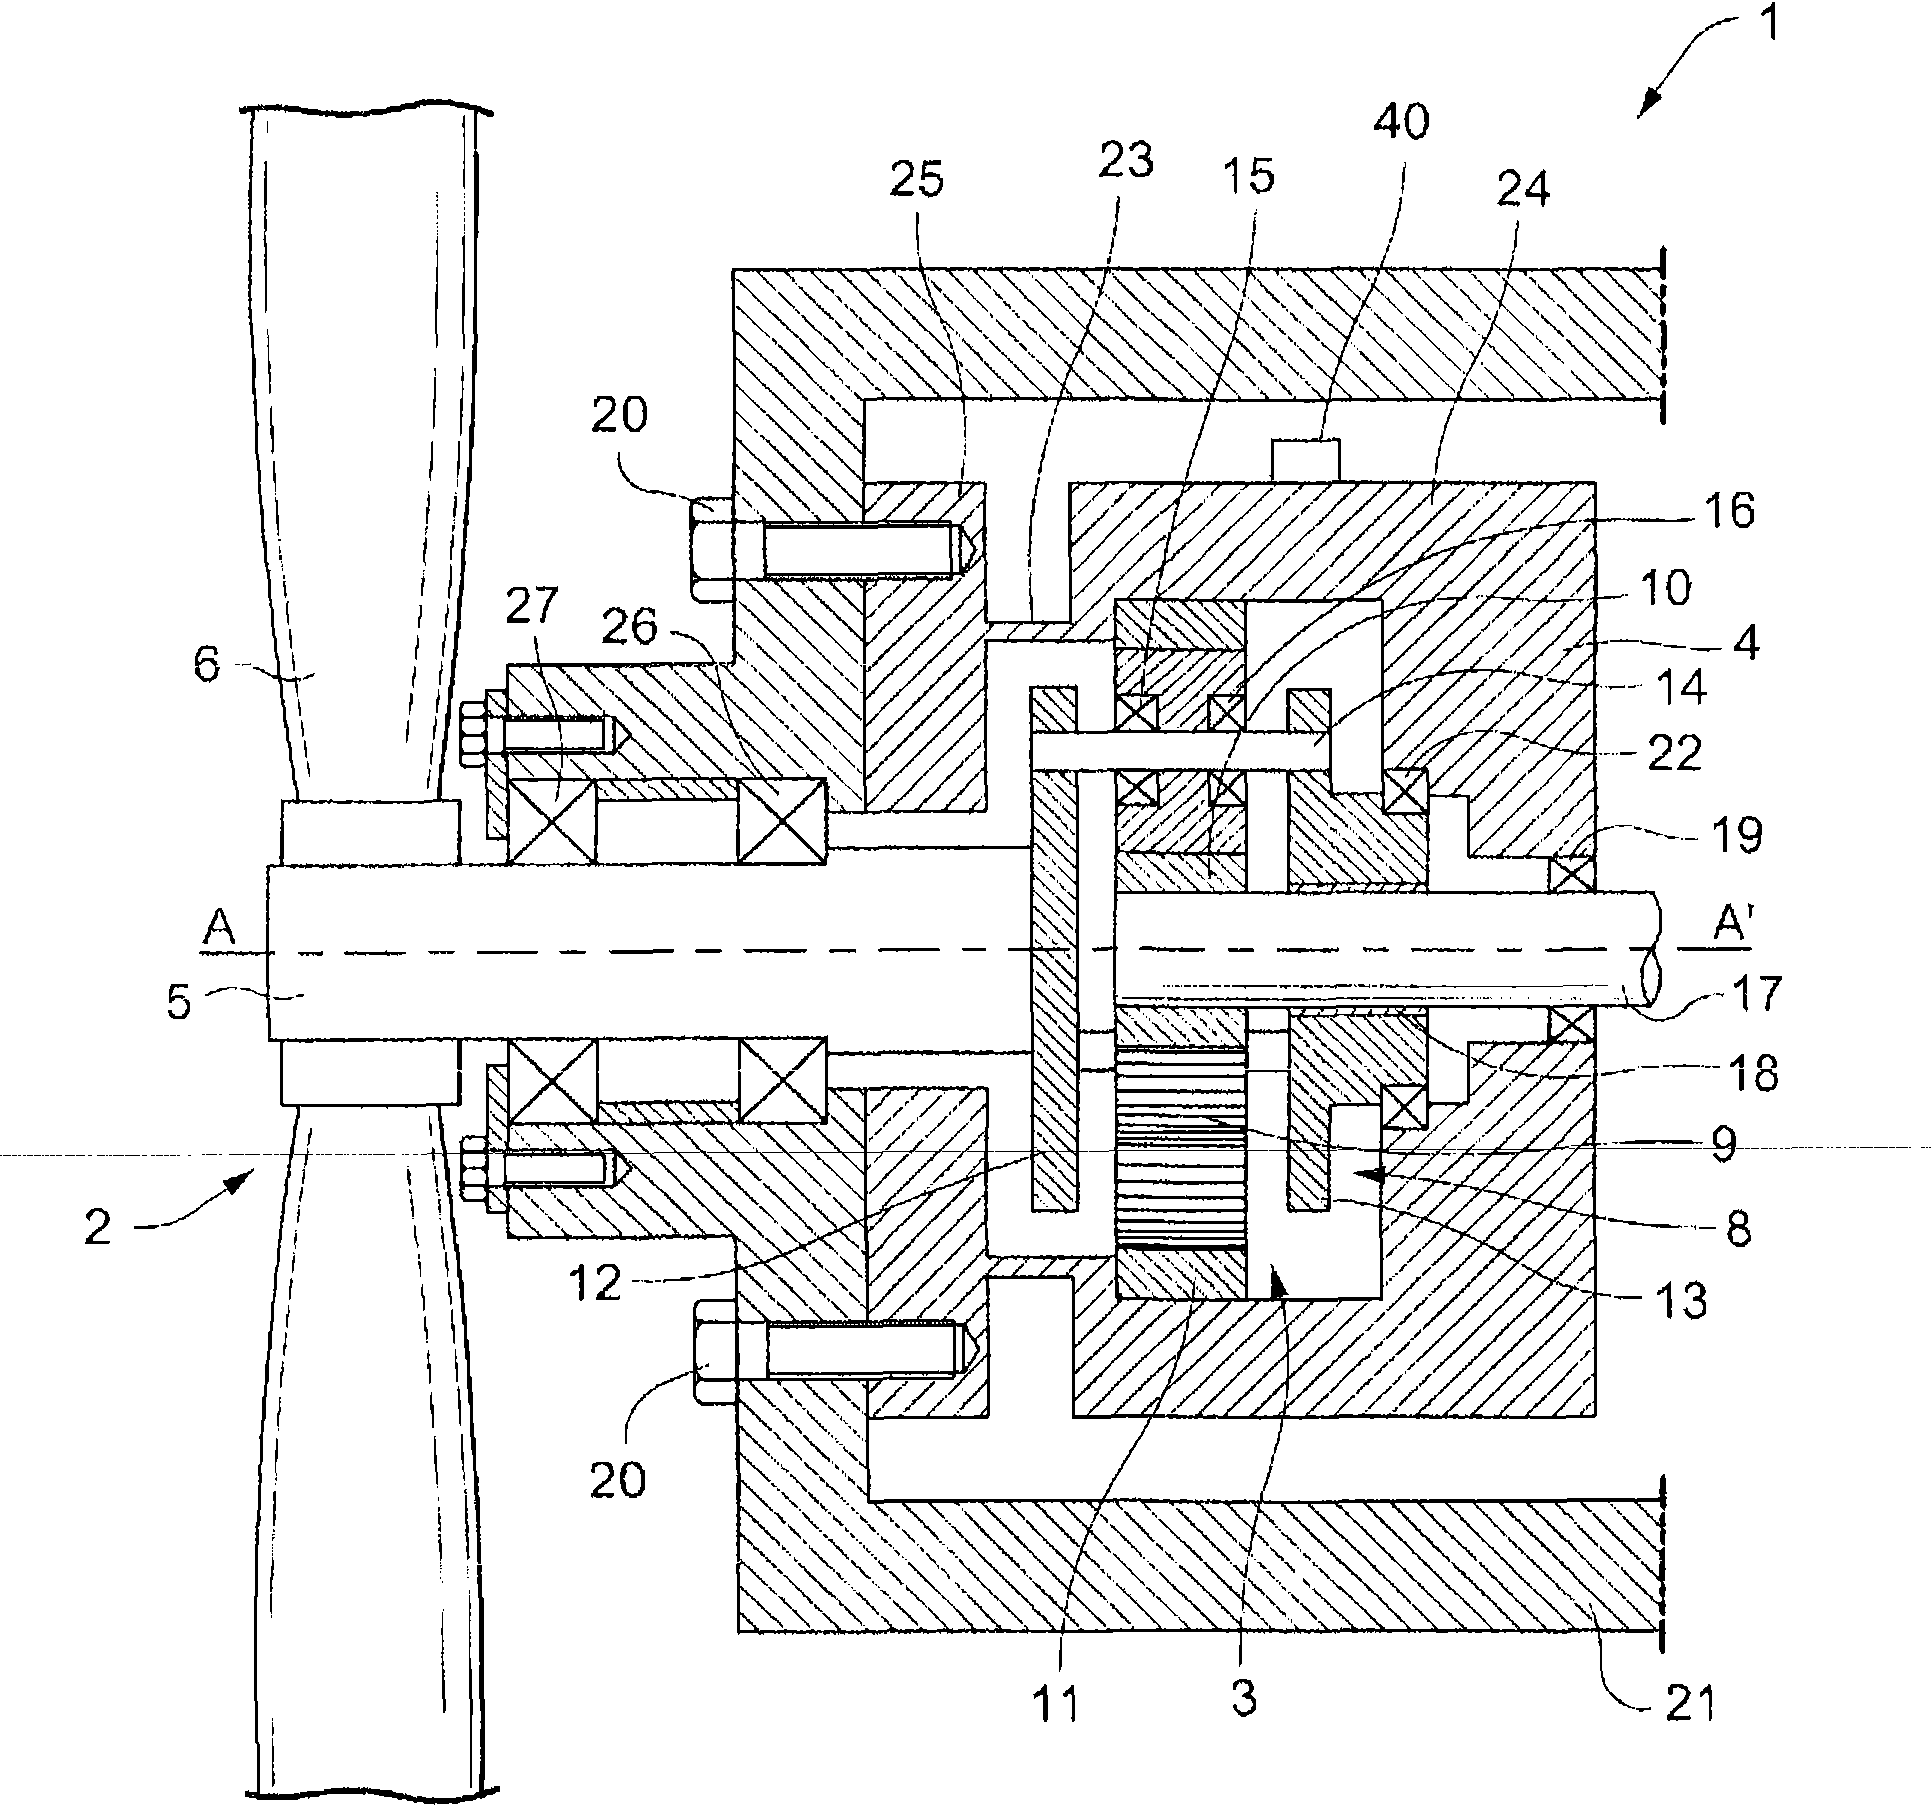 System and method for monitoring the condition of a gear assembly